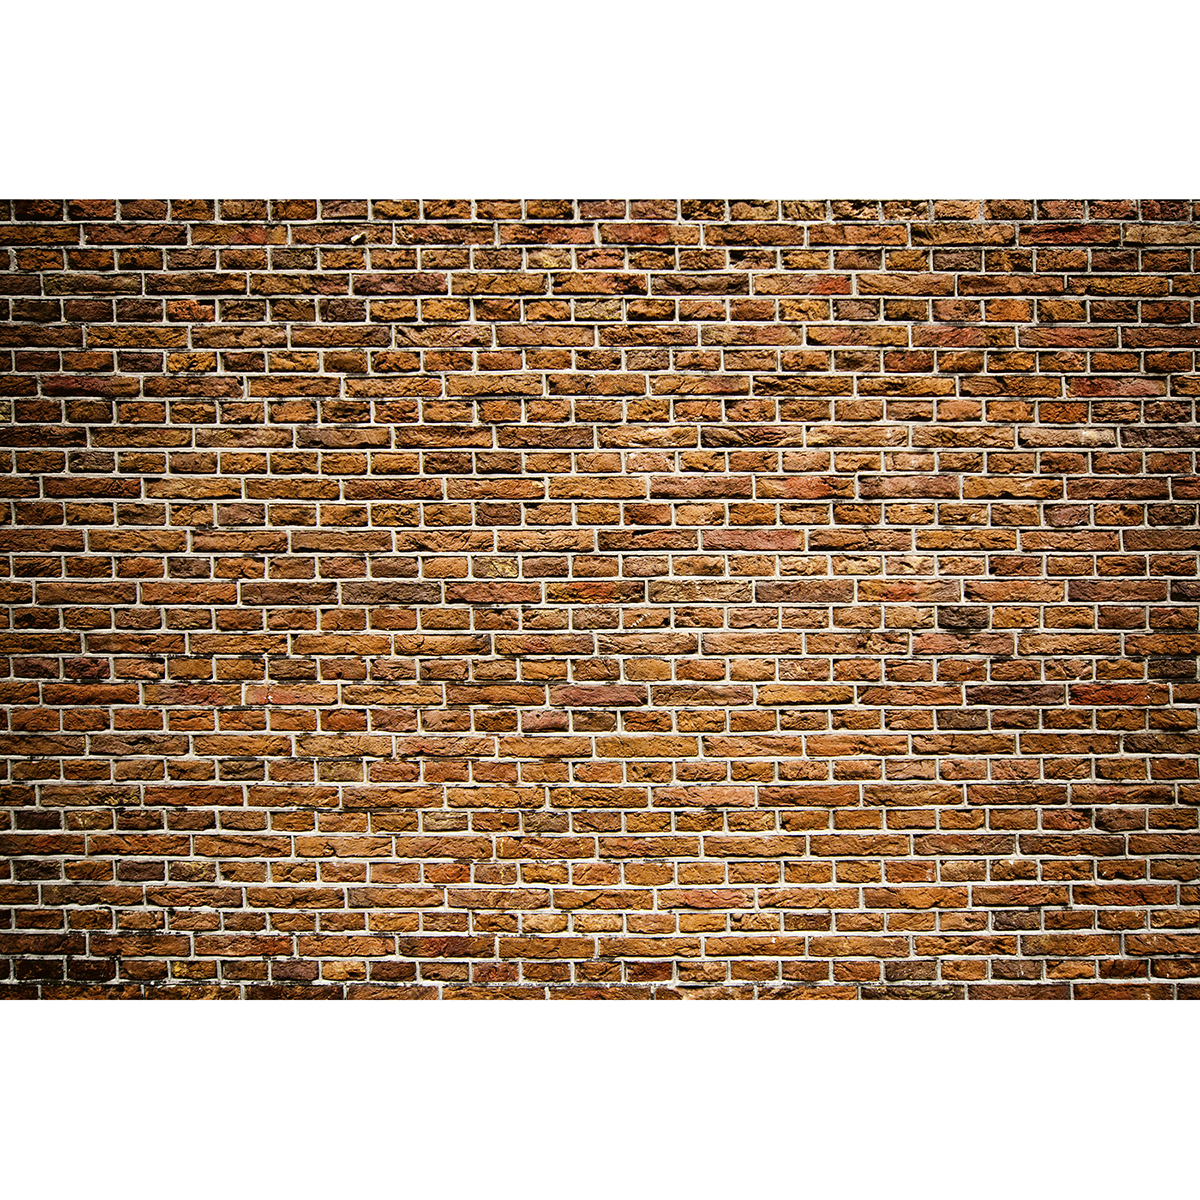 MS-5-0167 - Old Brick Wall Mural - by Dimex